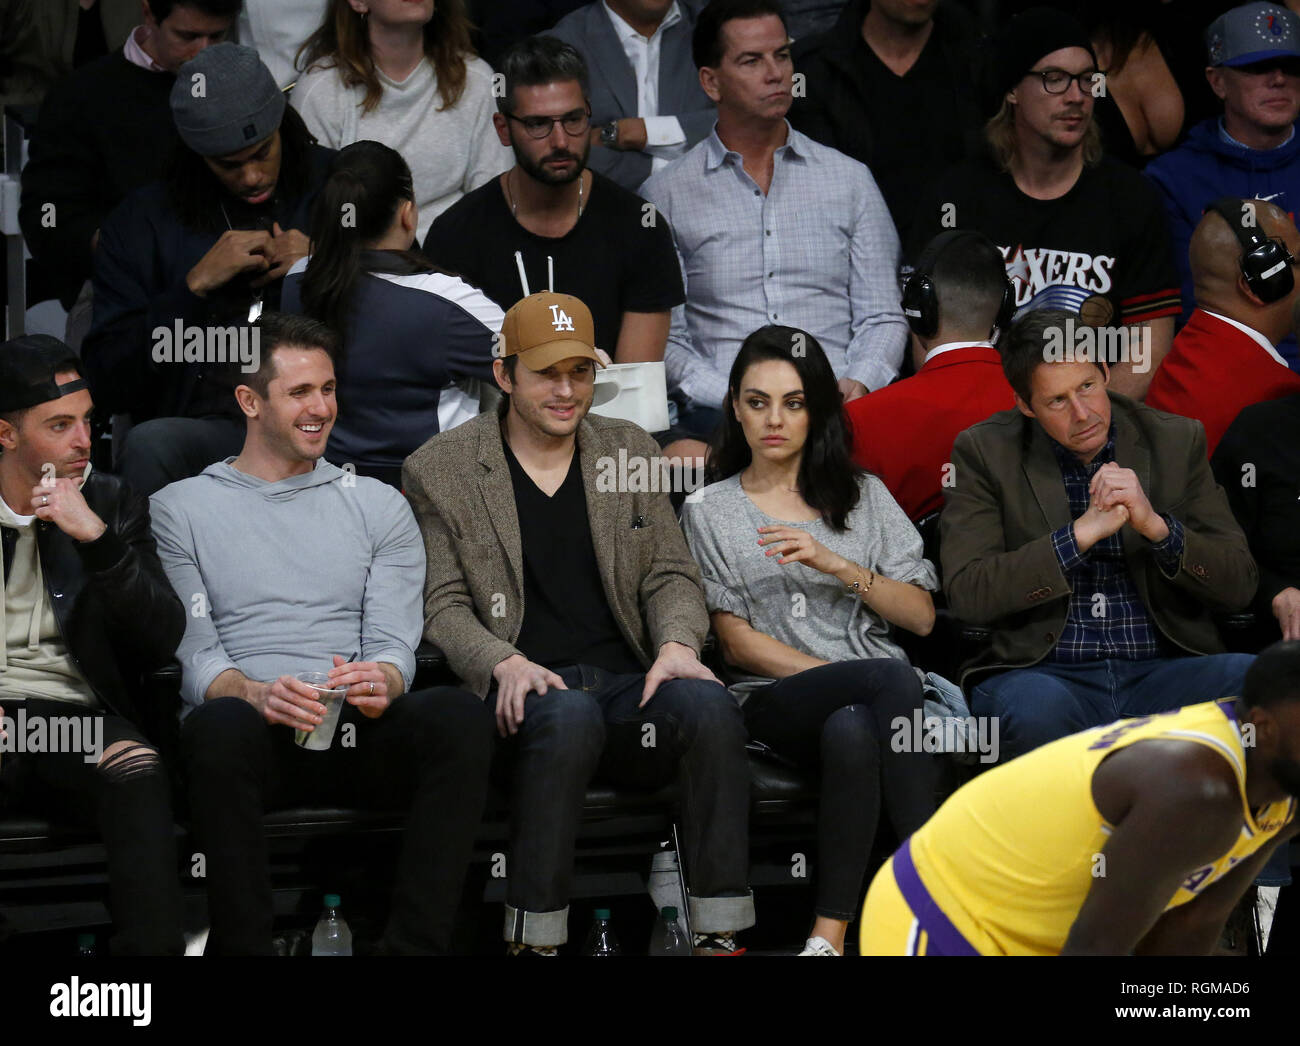 Los Angeles, California, USA. 29th Jan, 2019. Actor Ashton Kutcher and actress Mila Kunis attend an NBA basketball game between Los Angeles Lakers and Philadelphia 76ers Tuesday, Jan. 29, 2019, in Los Angeles. Credit: Ringo Chiu/ZUMA Wire/Alamy Live News Stock Photo